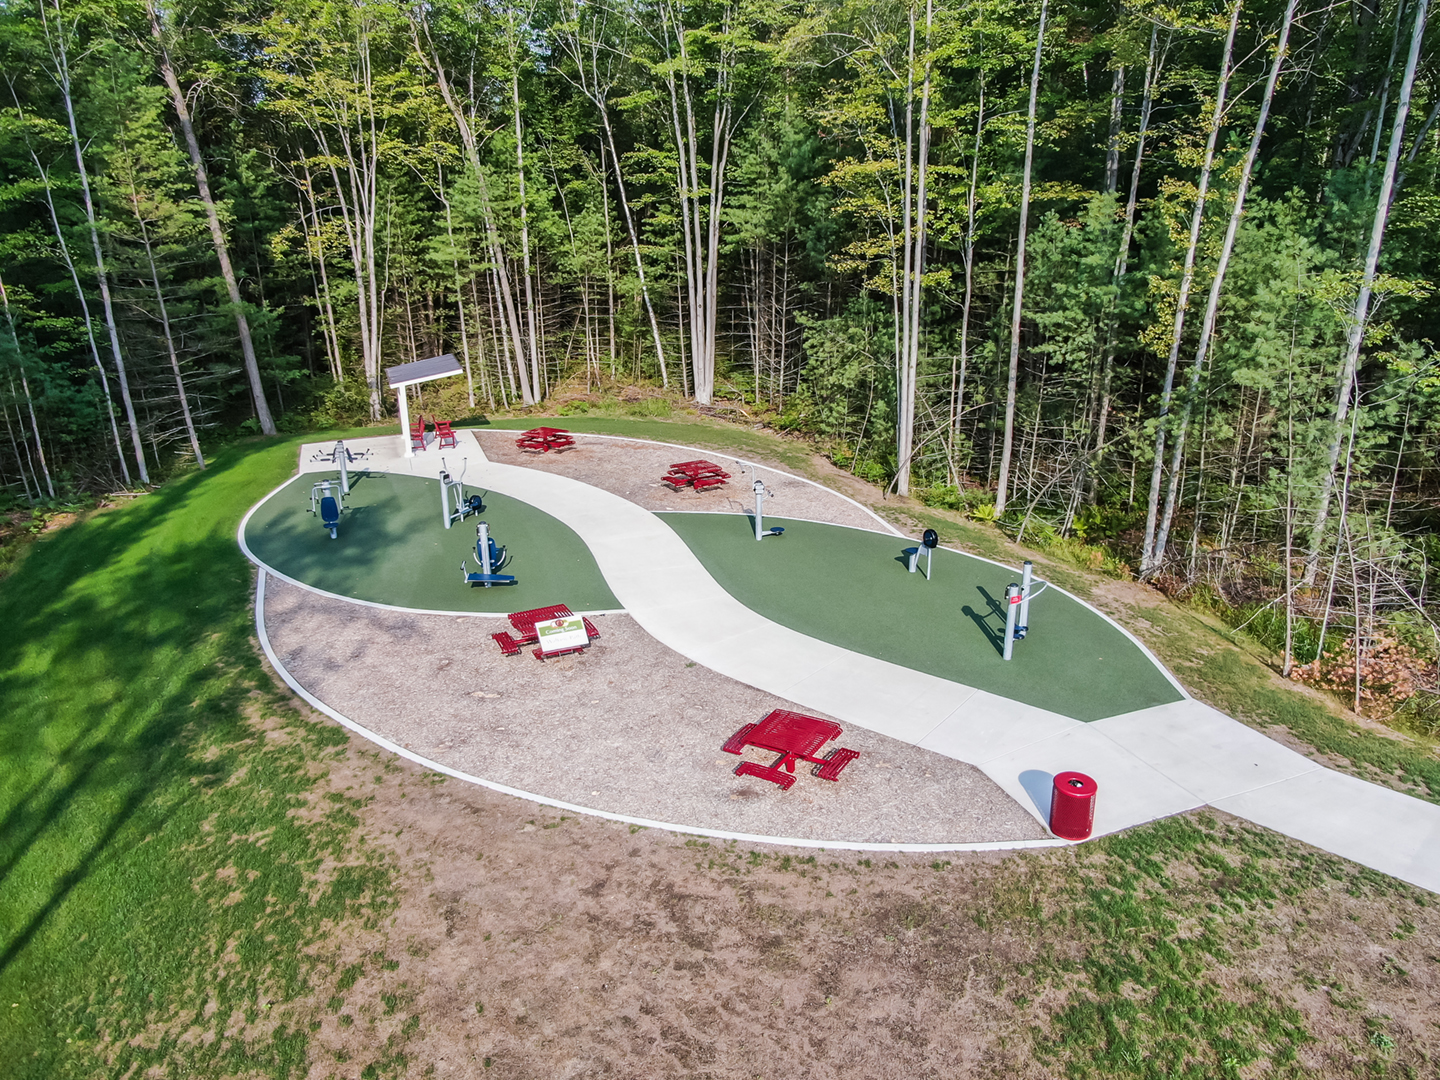 Aerial view of the Sanford outdoor exercise equipment. Book a tour in person or take virtual tours.